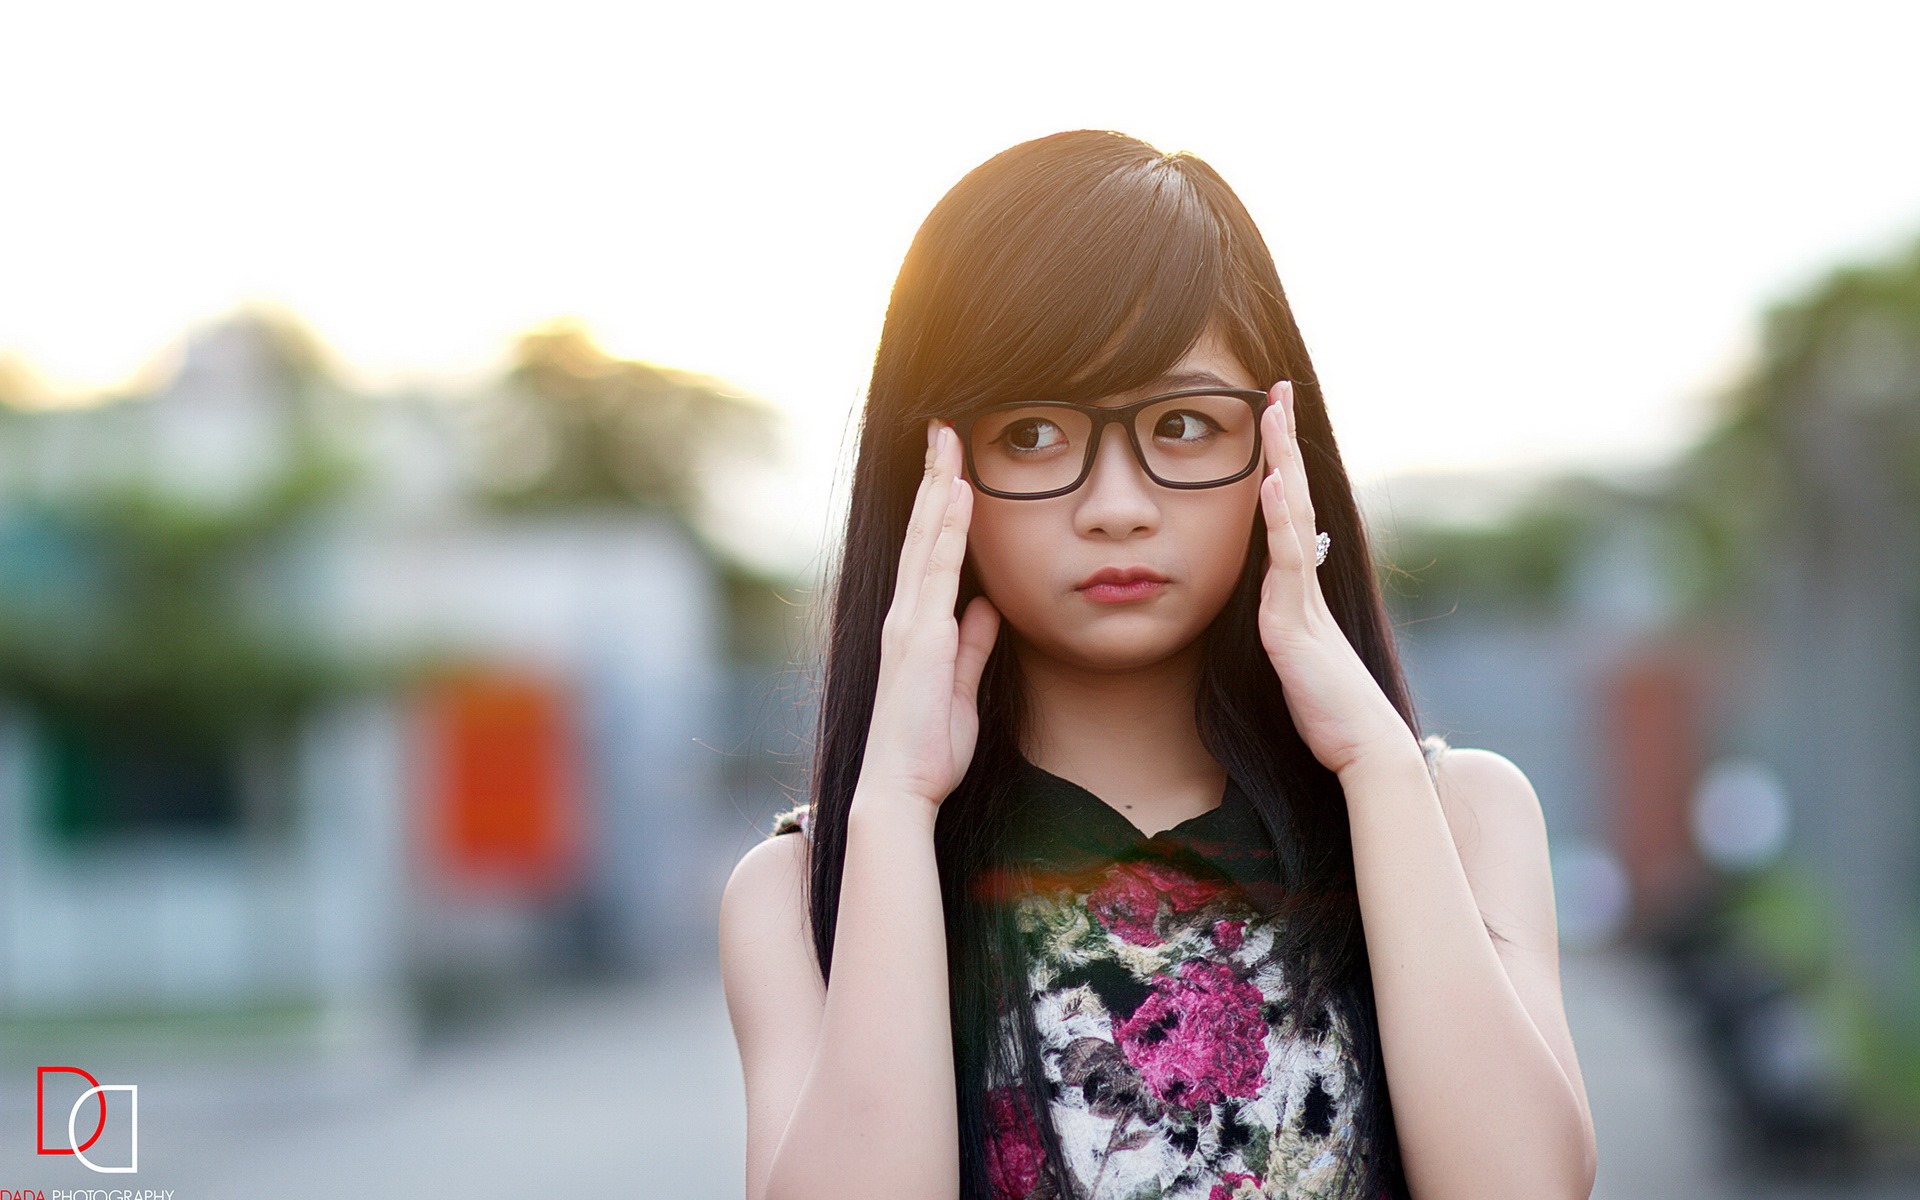 Pure and lovely young Asian girl HD wallpapers collection (3) #34 - 1920x1200